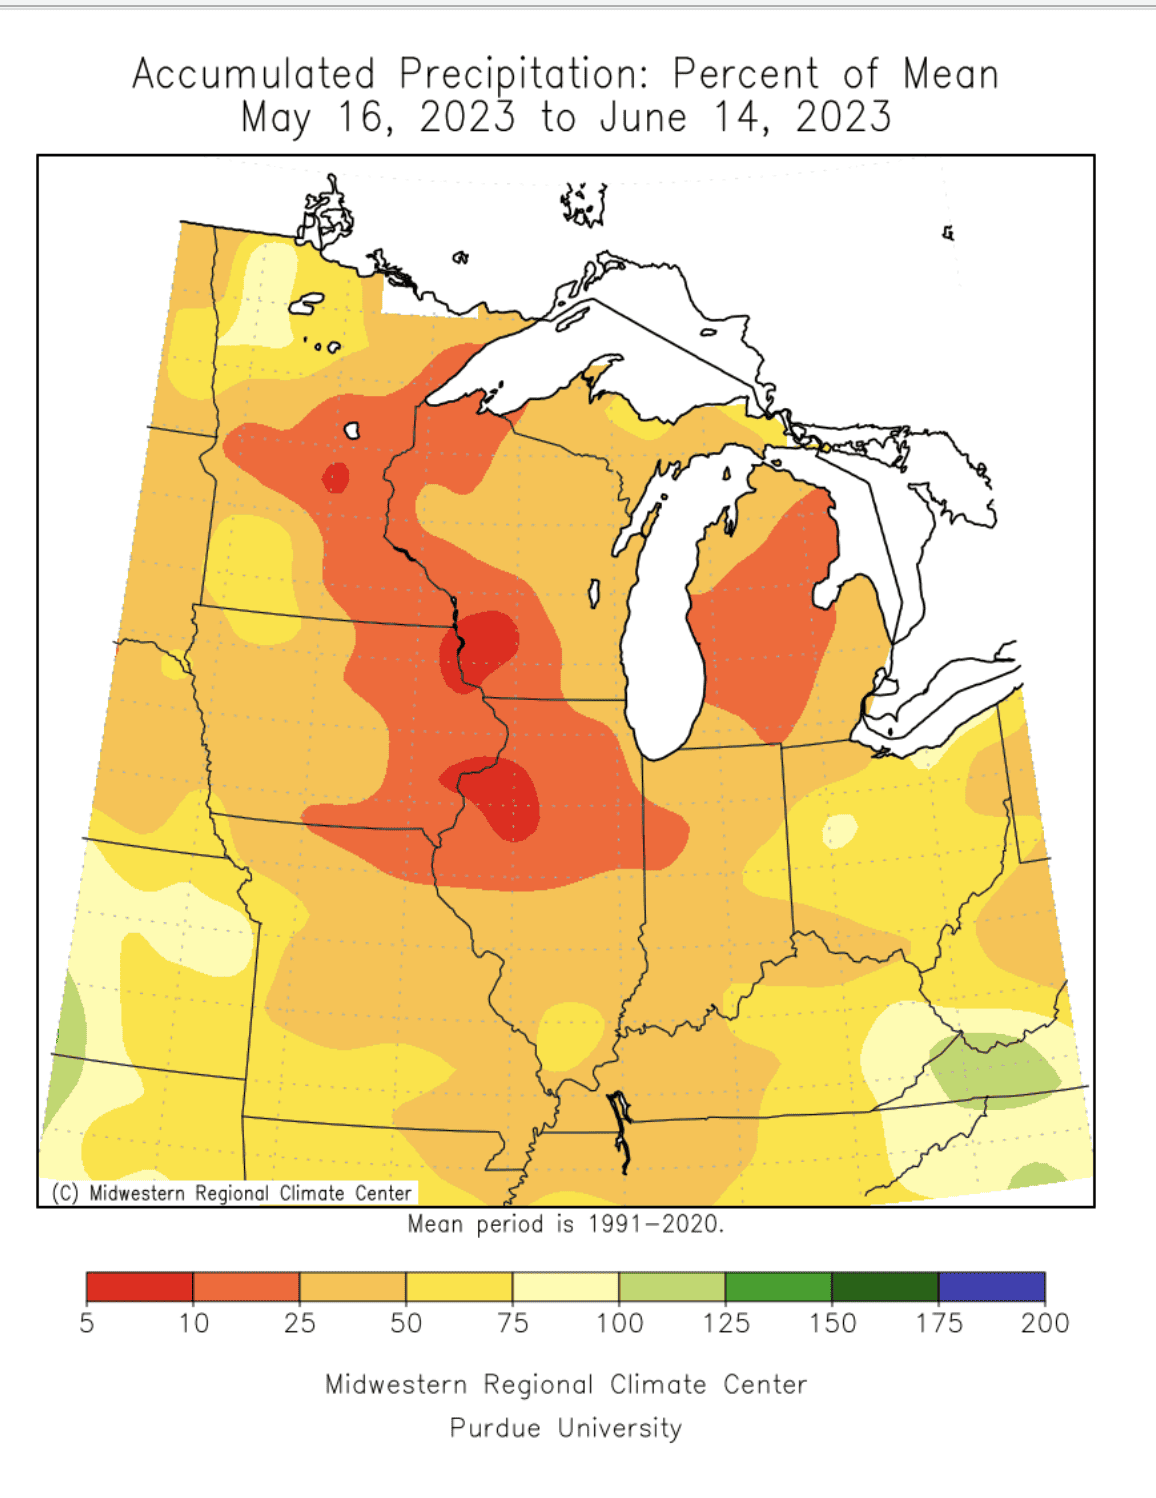 All about El Nino and the Midwestern grain drought Best Weather, Inc